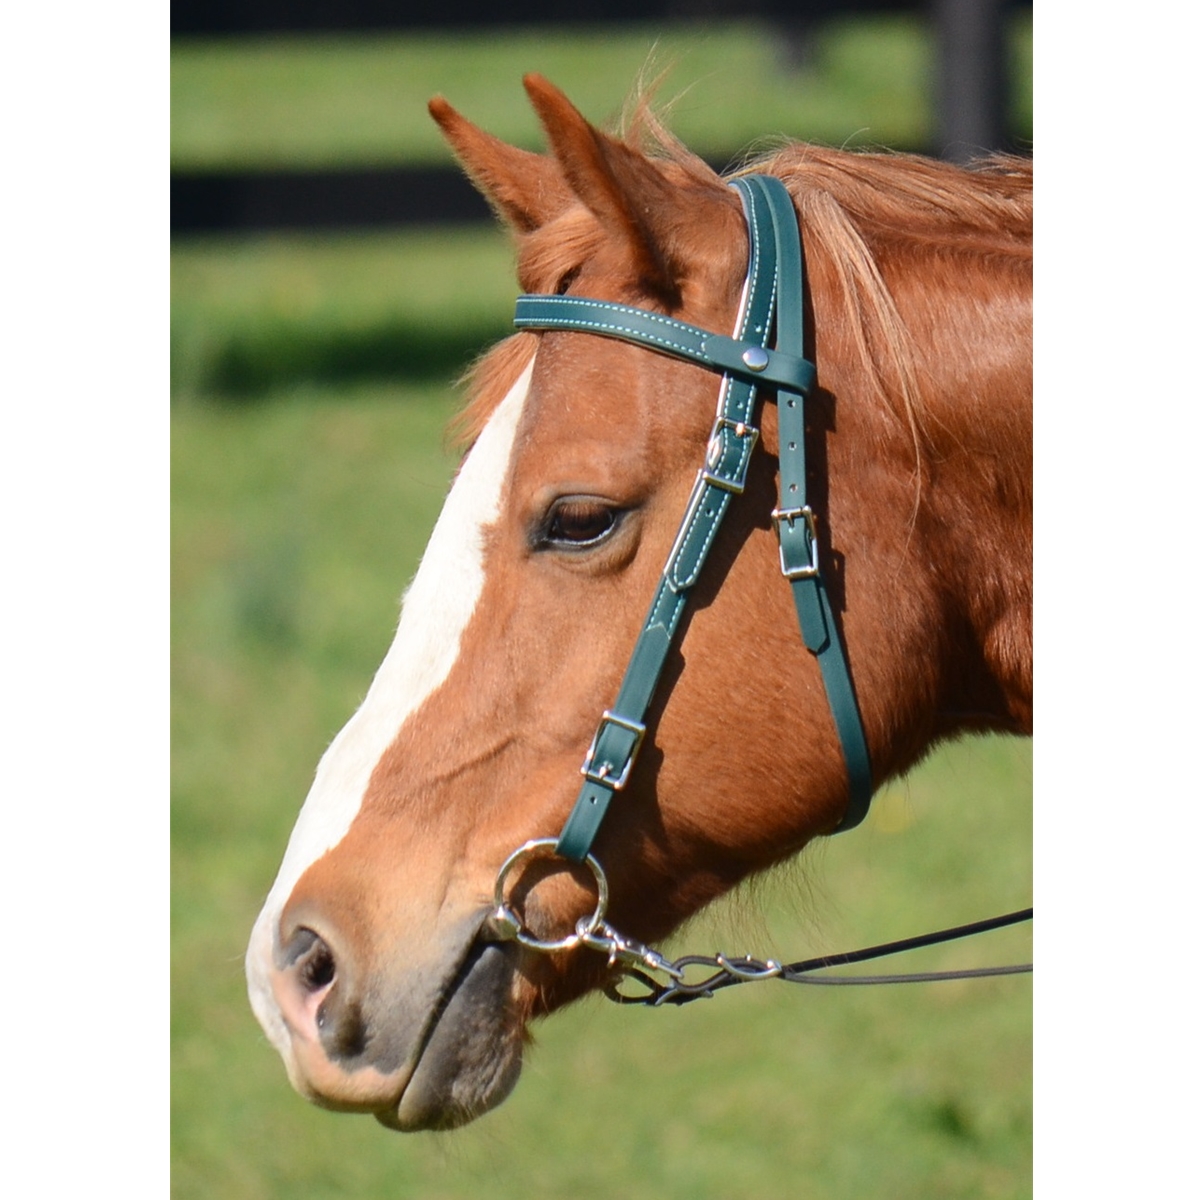 Weaver Leather Browband Bridle with Single Cheek Buckle